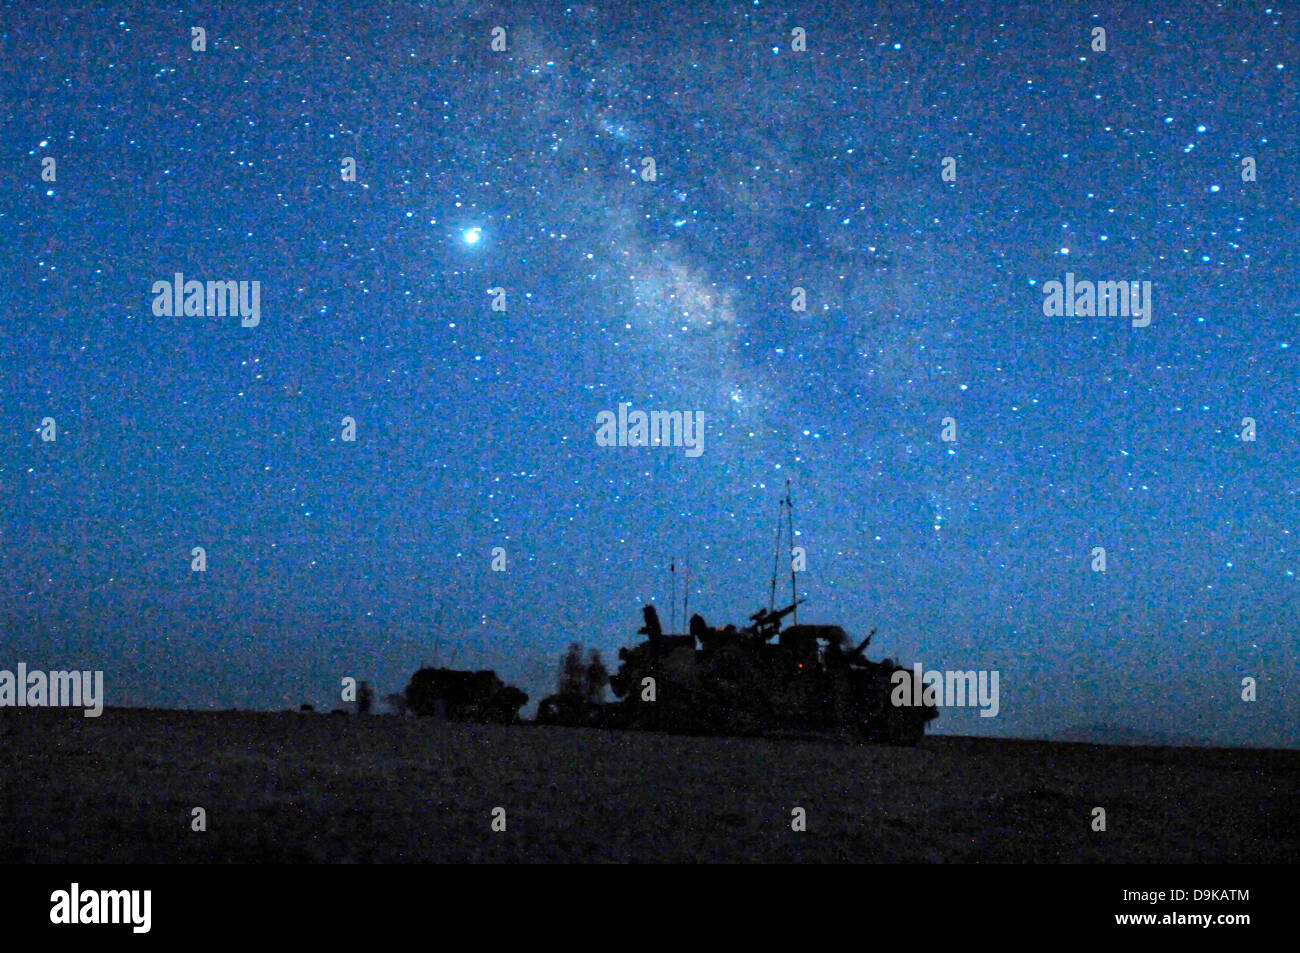 Dutch soldiers settle in for the night under a star filled sky August 19, 2008 in Uruzgan province, Afghanistan. The platoon was on a 3-day International Security Assistance Force mission patrolling through villages. Stock Photo